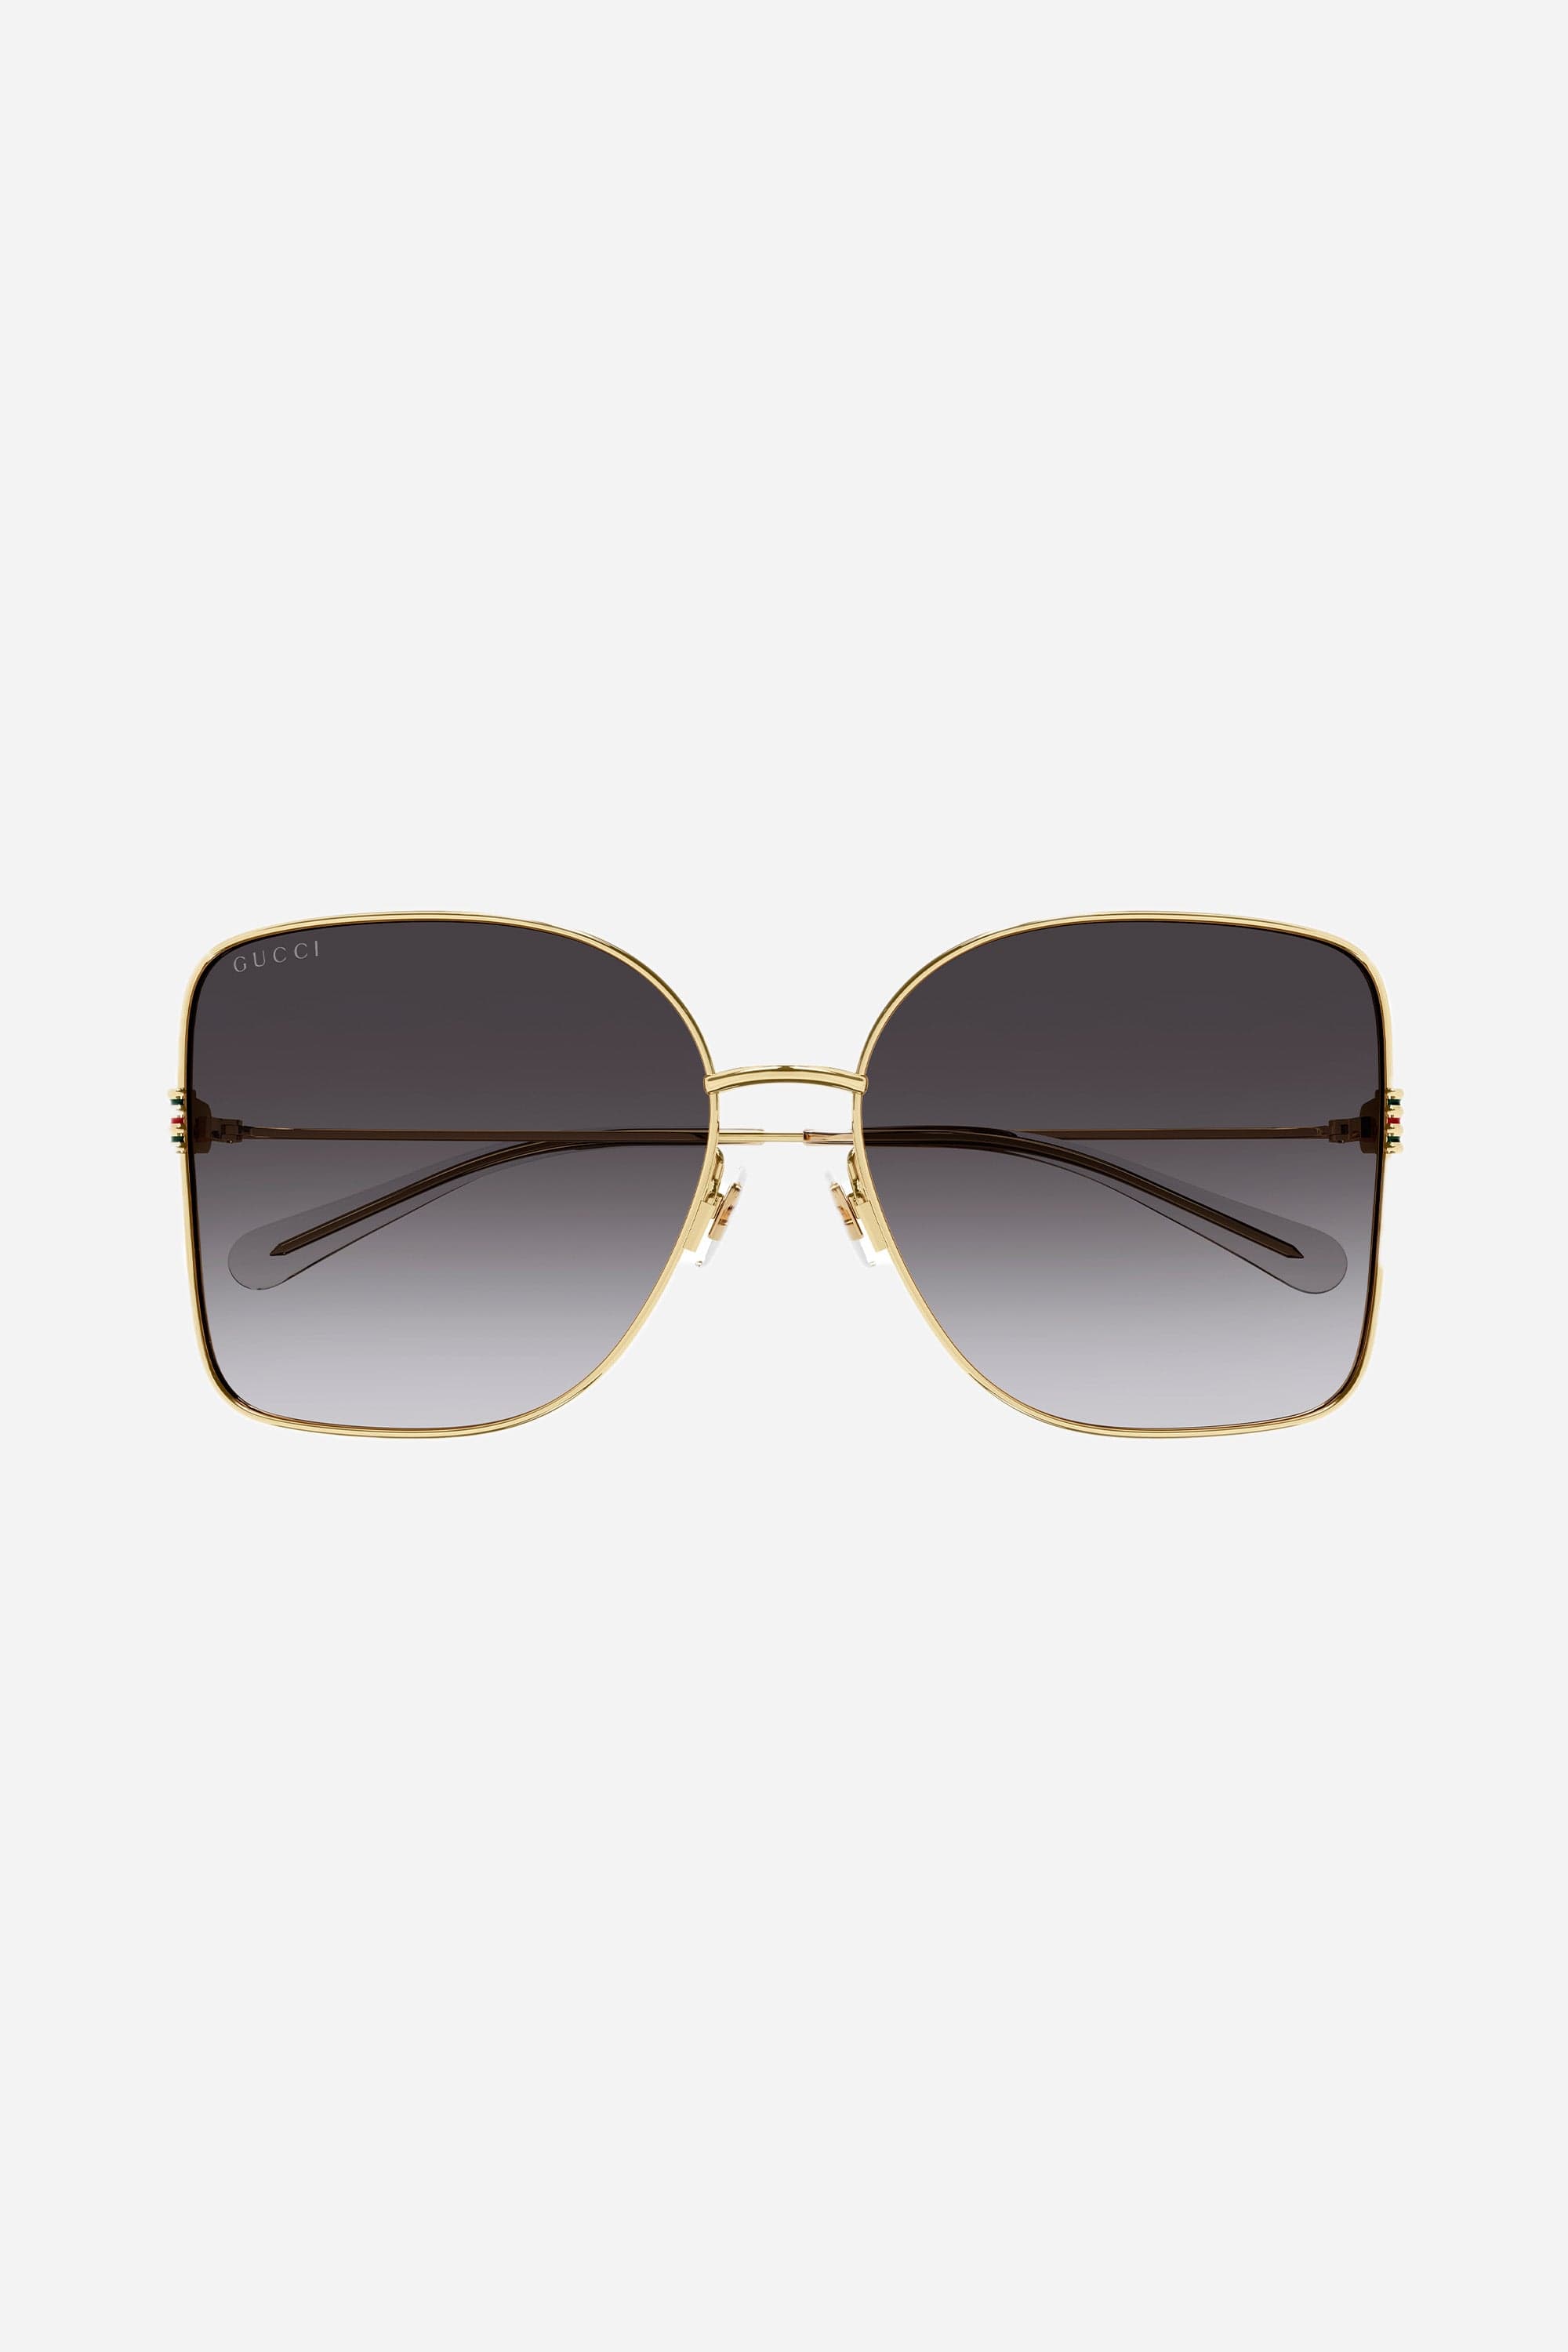 Gucci metal squared sunglasses with colored enamel - Eyewear Club